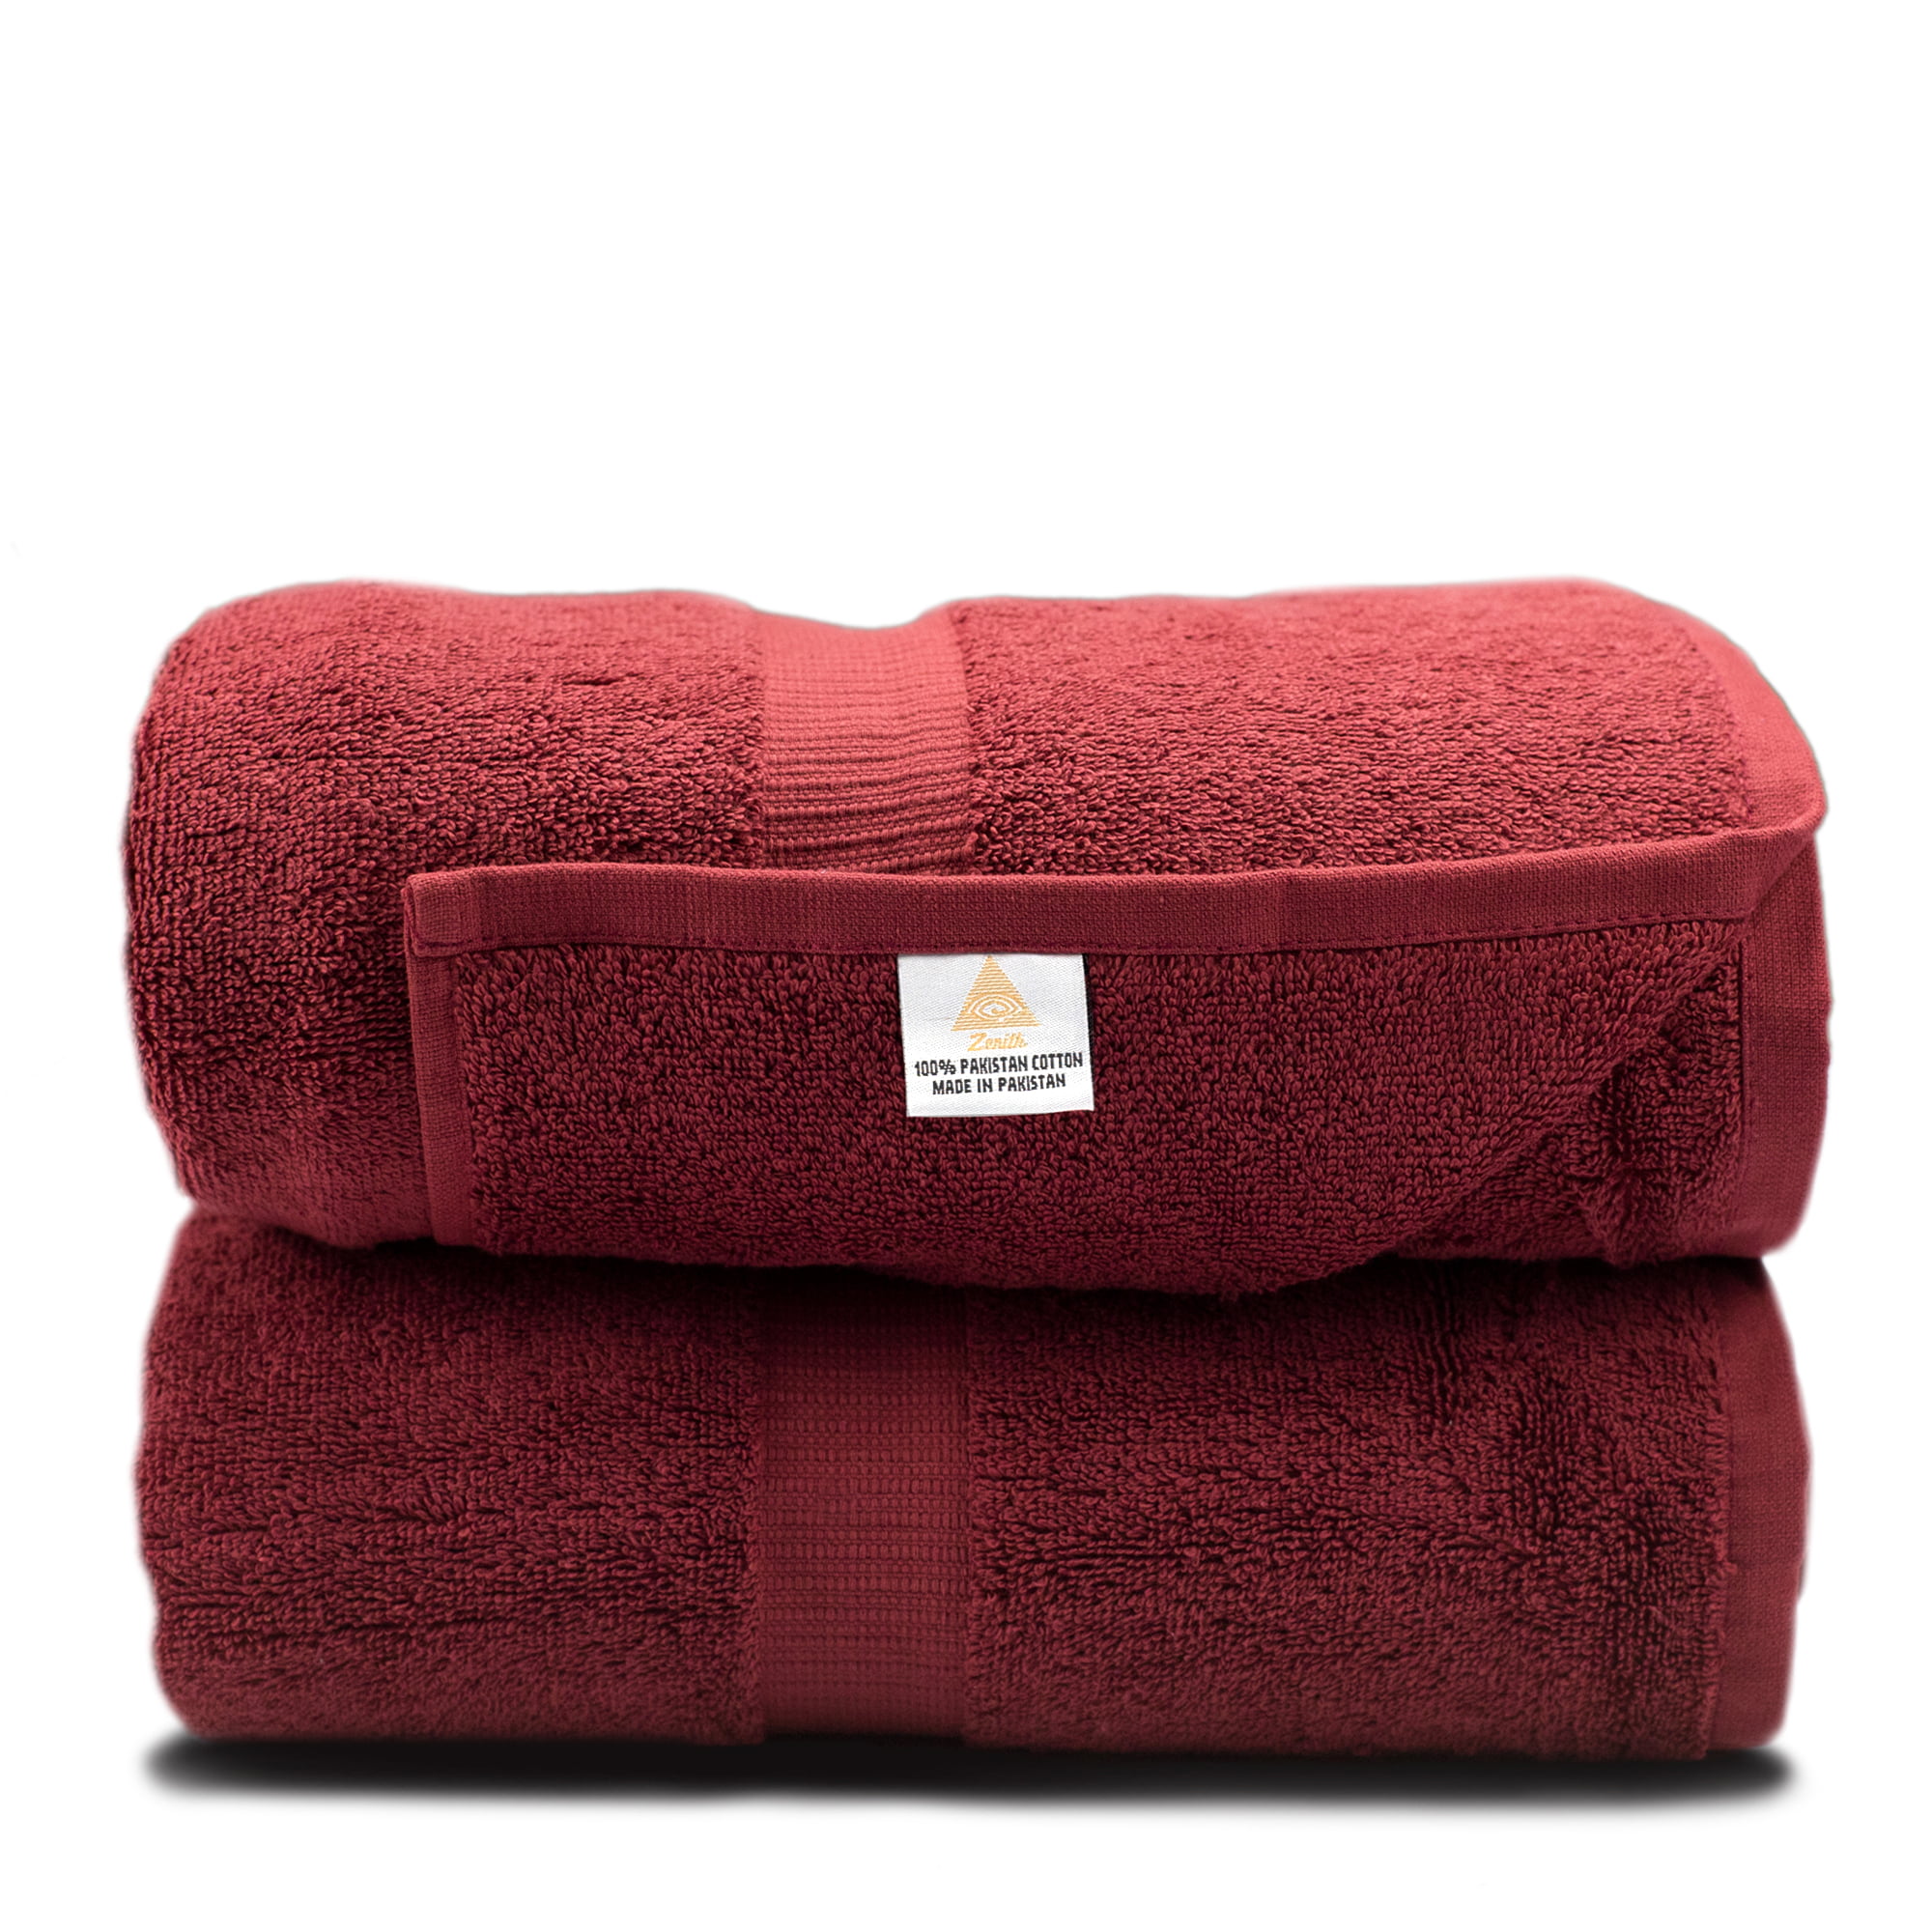 Details about   4 x Large Jumbo Bath Sheets 100% Egyptian Combed Cotton Large Size Soft Towels 